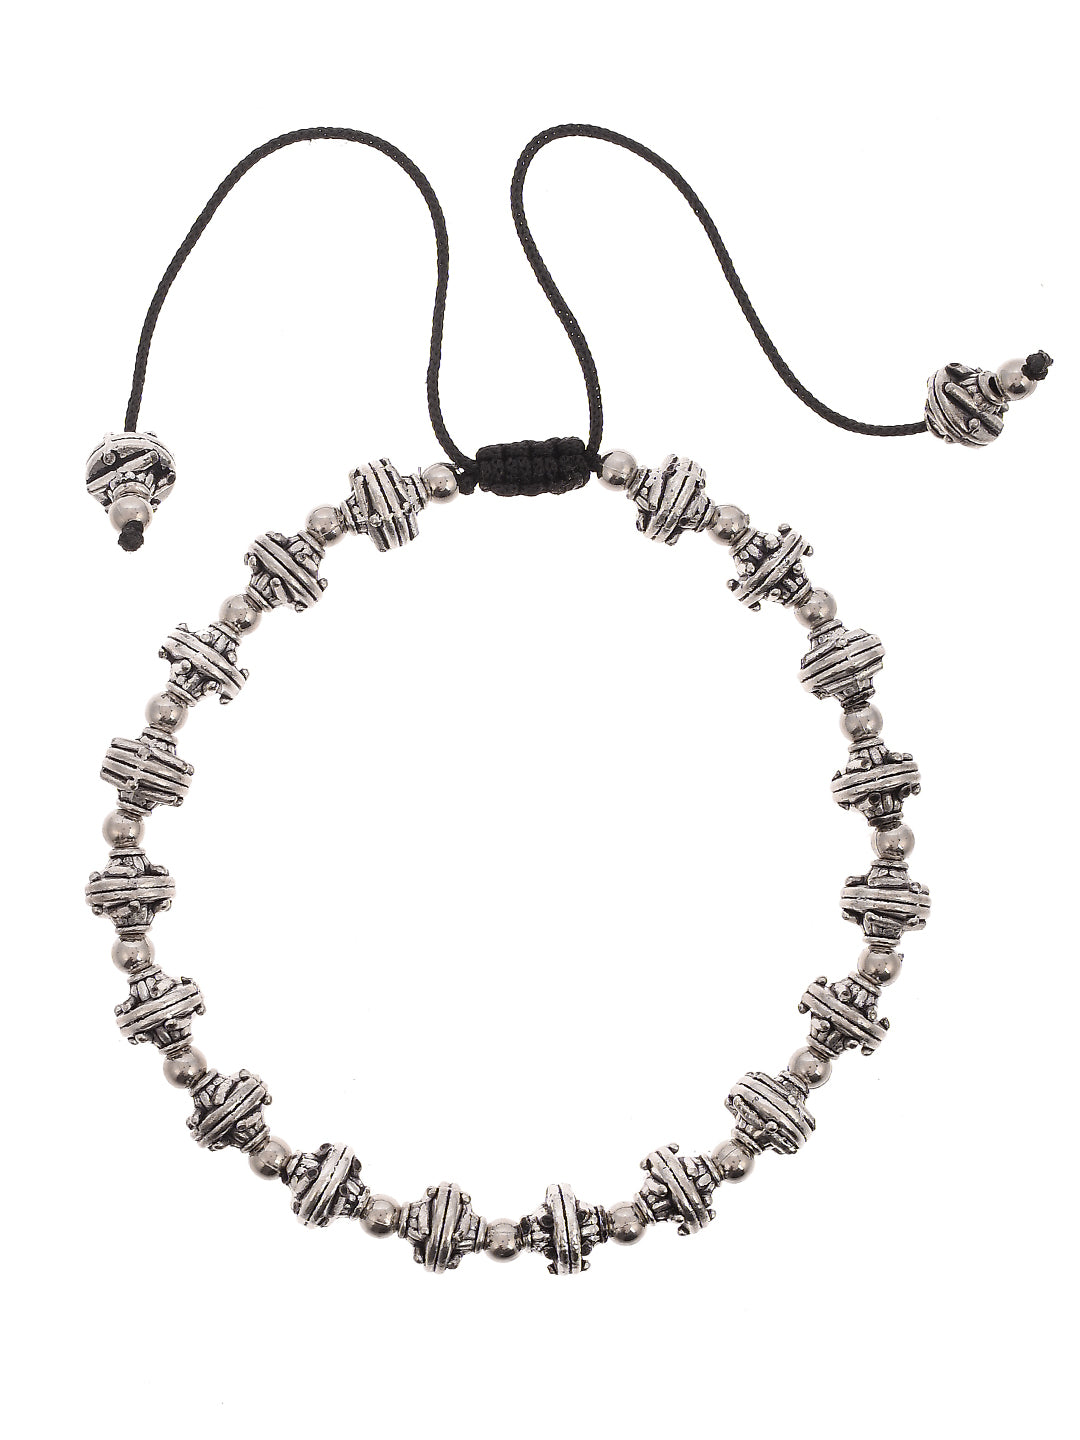 Silver Plated Oxidized Black Thread Anklets for women